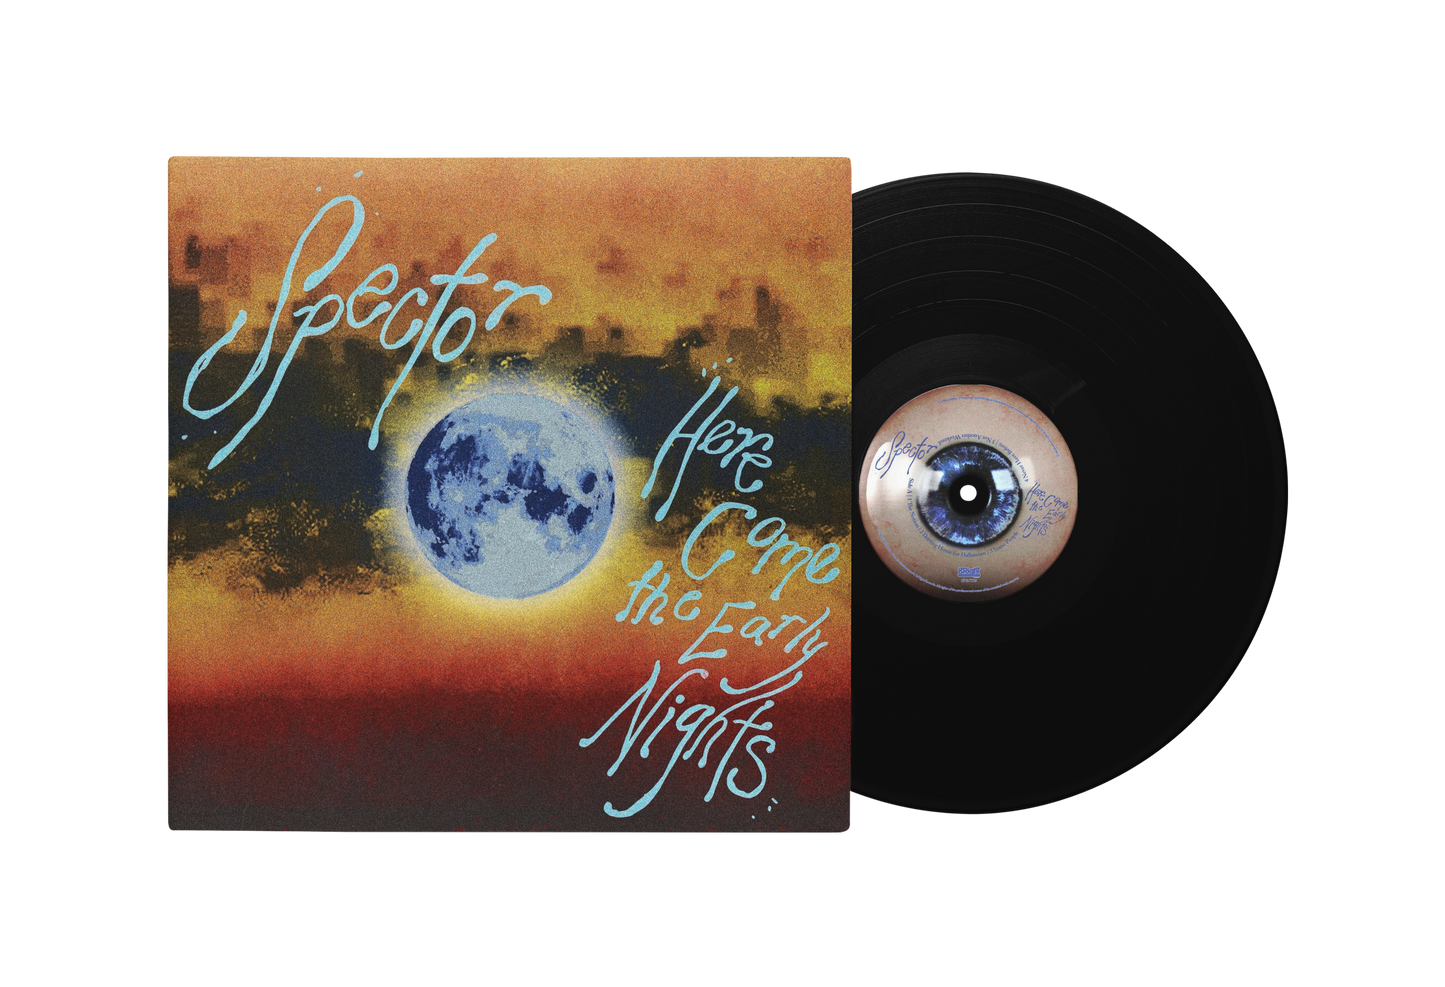 Spector - Here Come the Early Nights - Black Vinyl